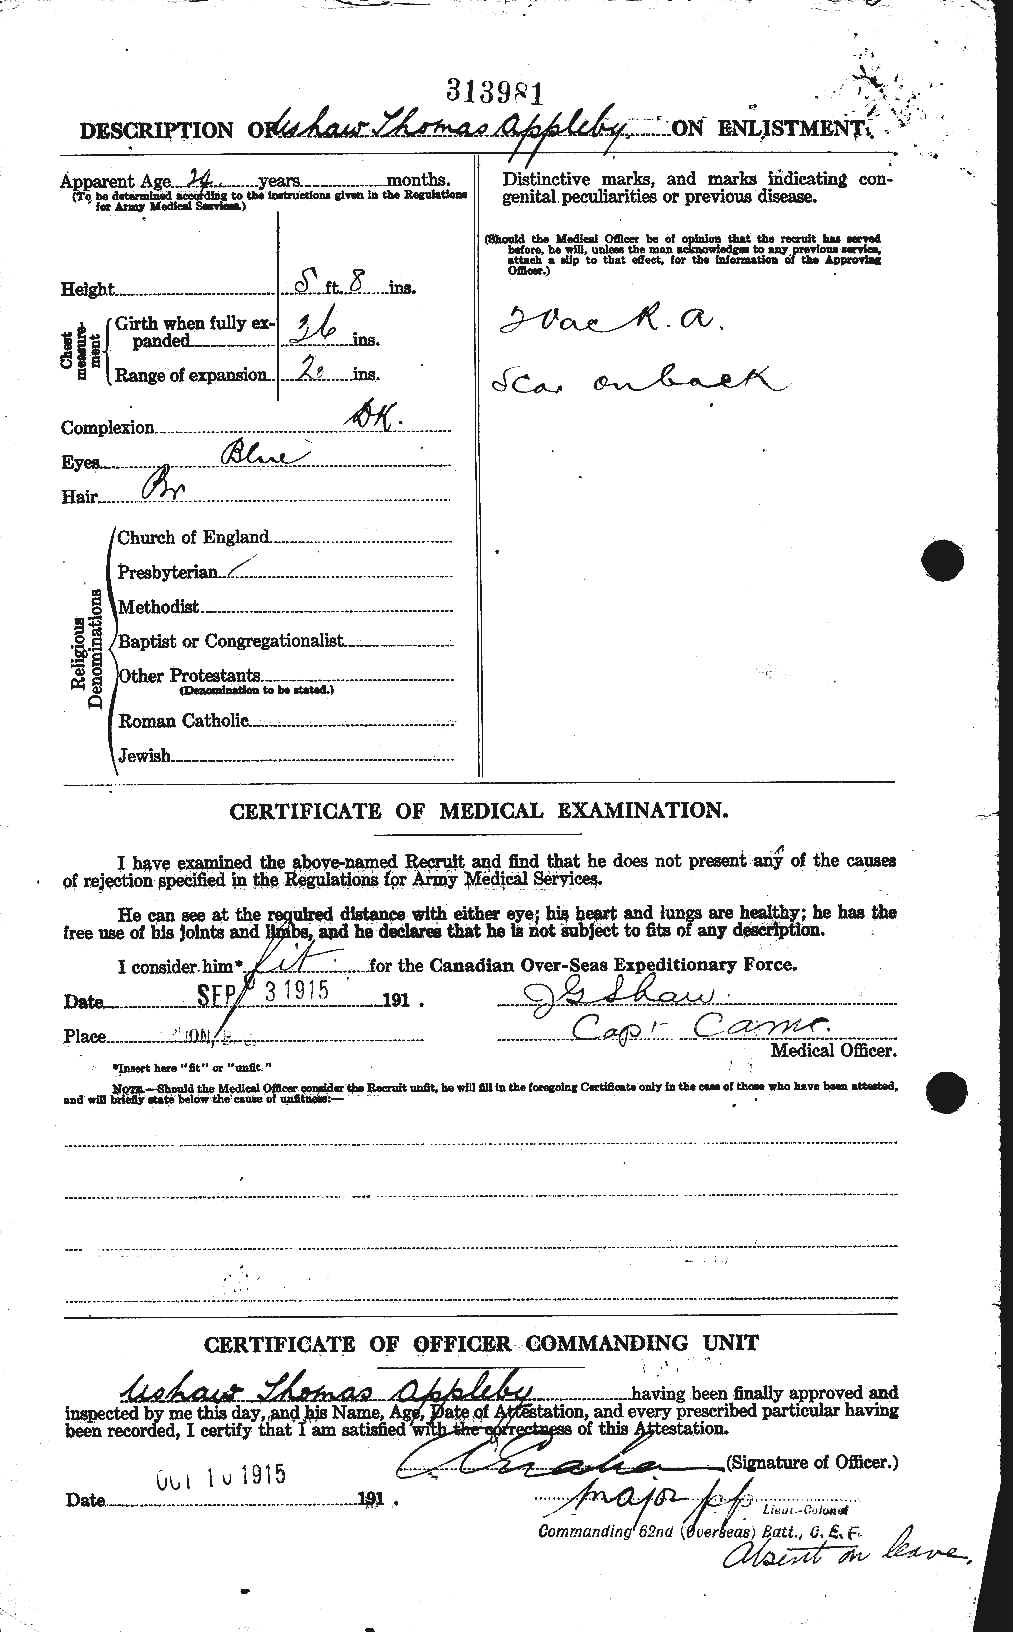 Personnel Records of the First World War - CEF 643466b